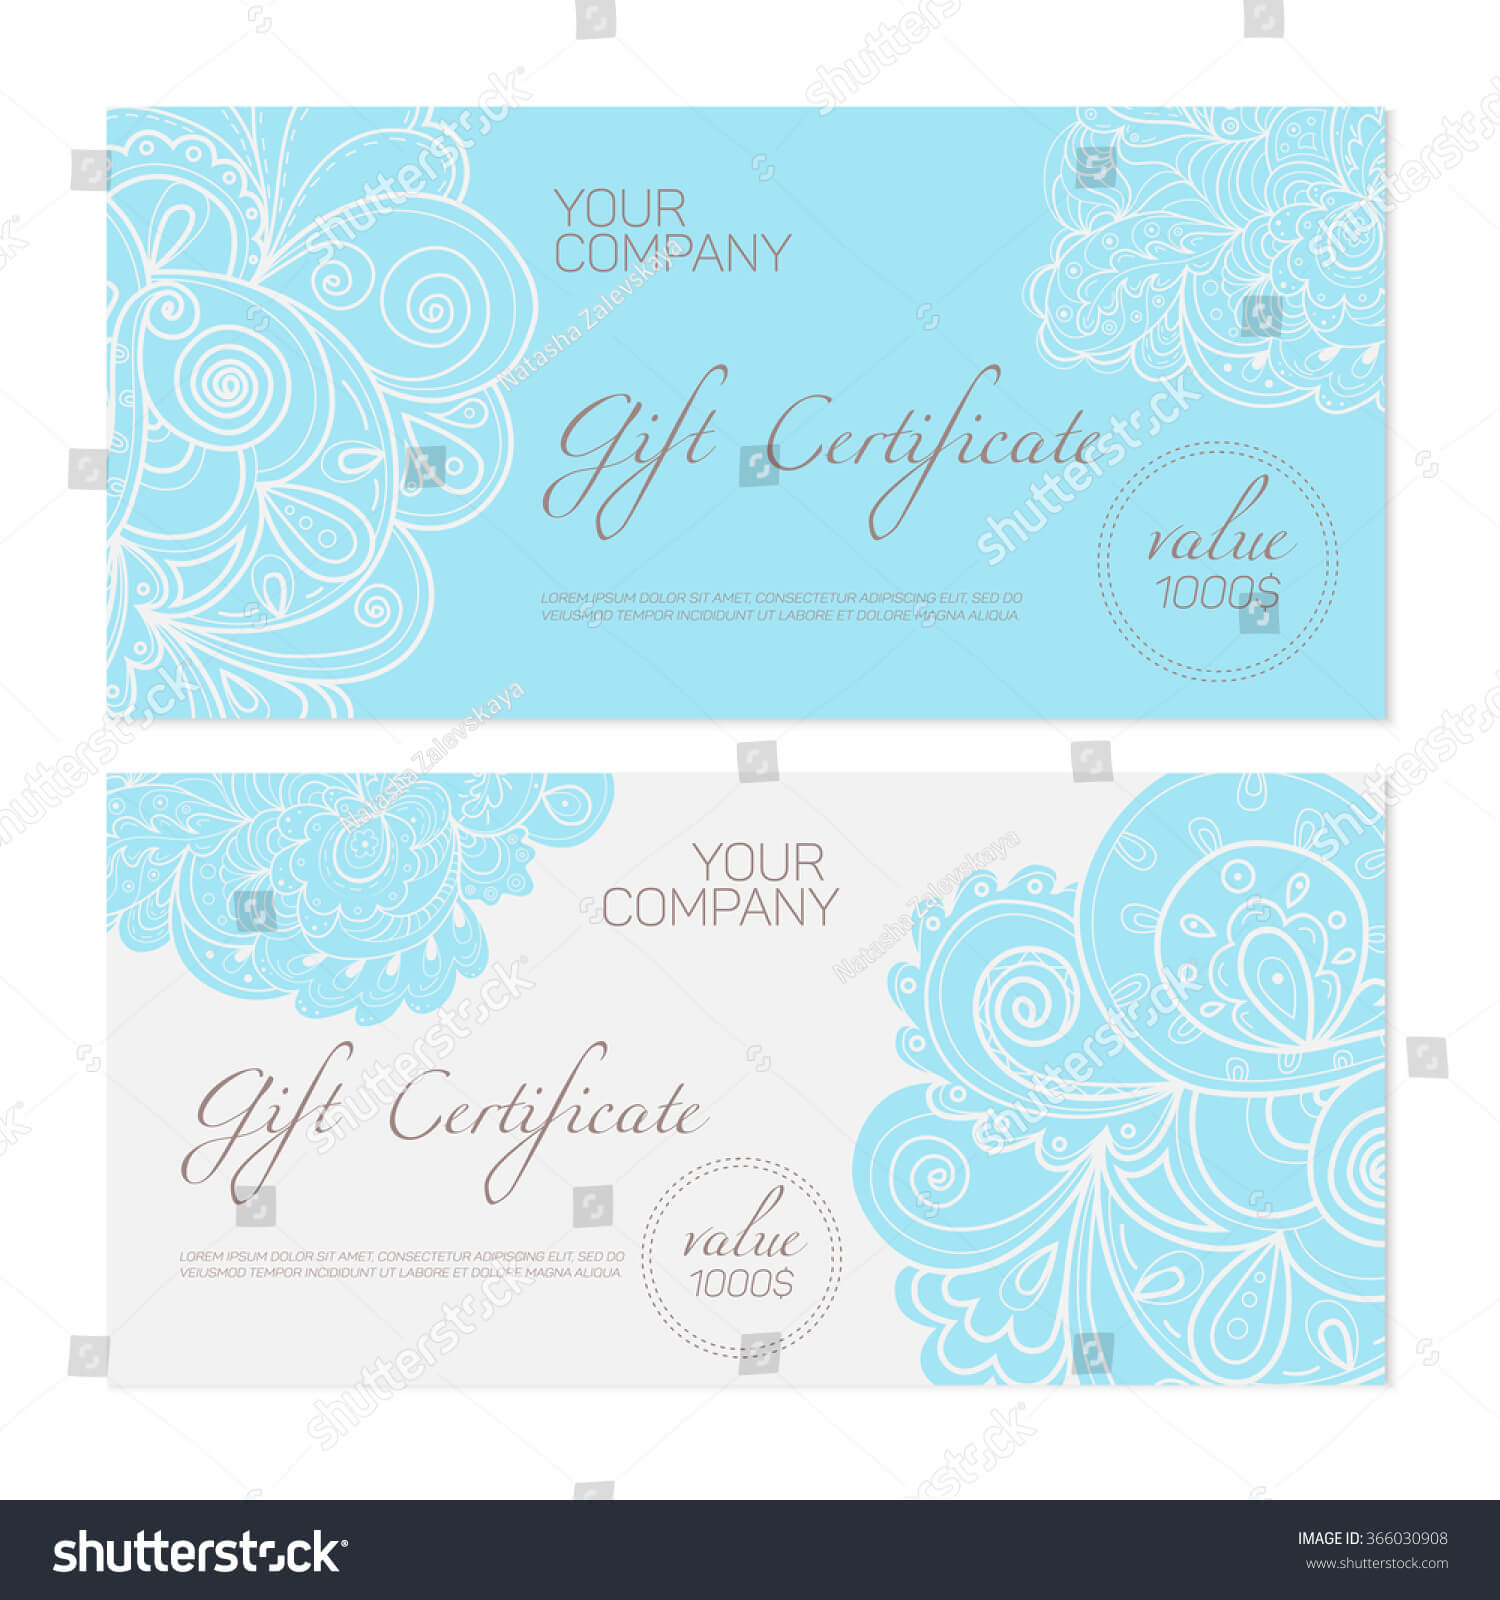 Elegant Gift Certificate Template Abstract Ornamental Stock In Elegant Gift Certificate Template